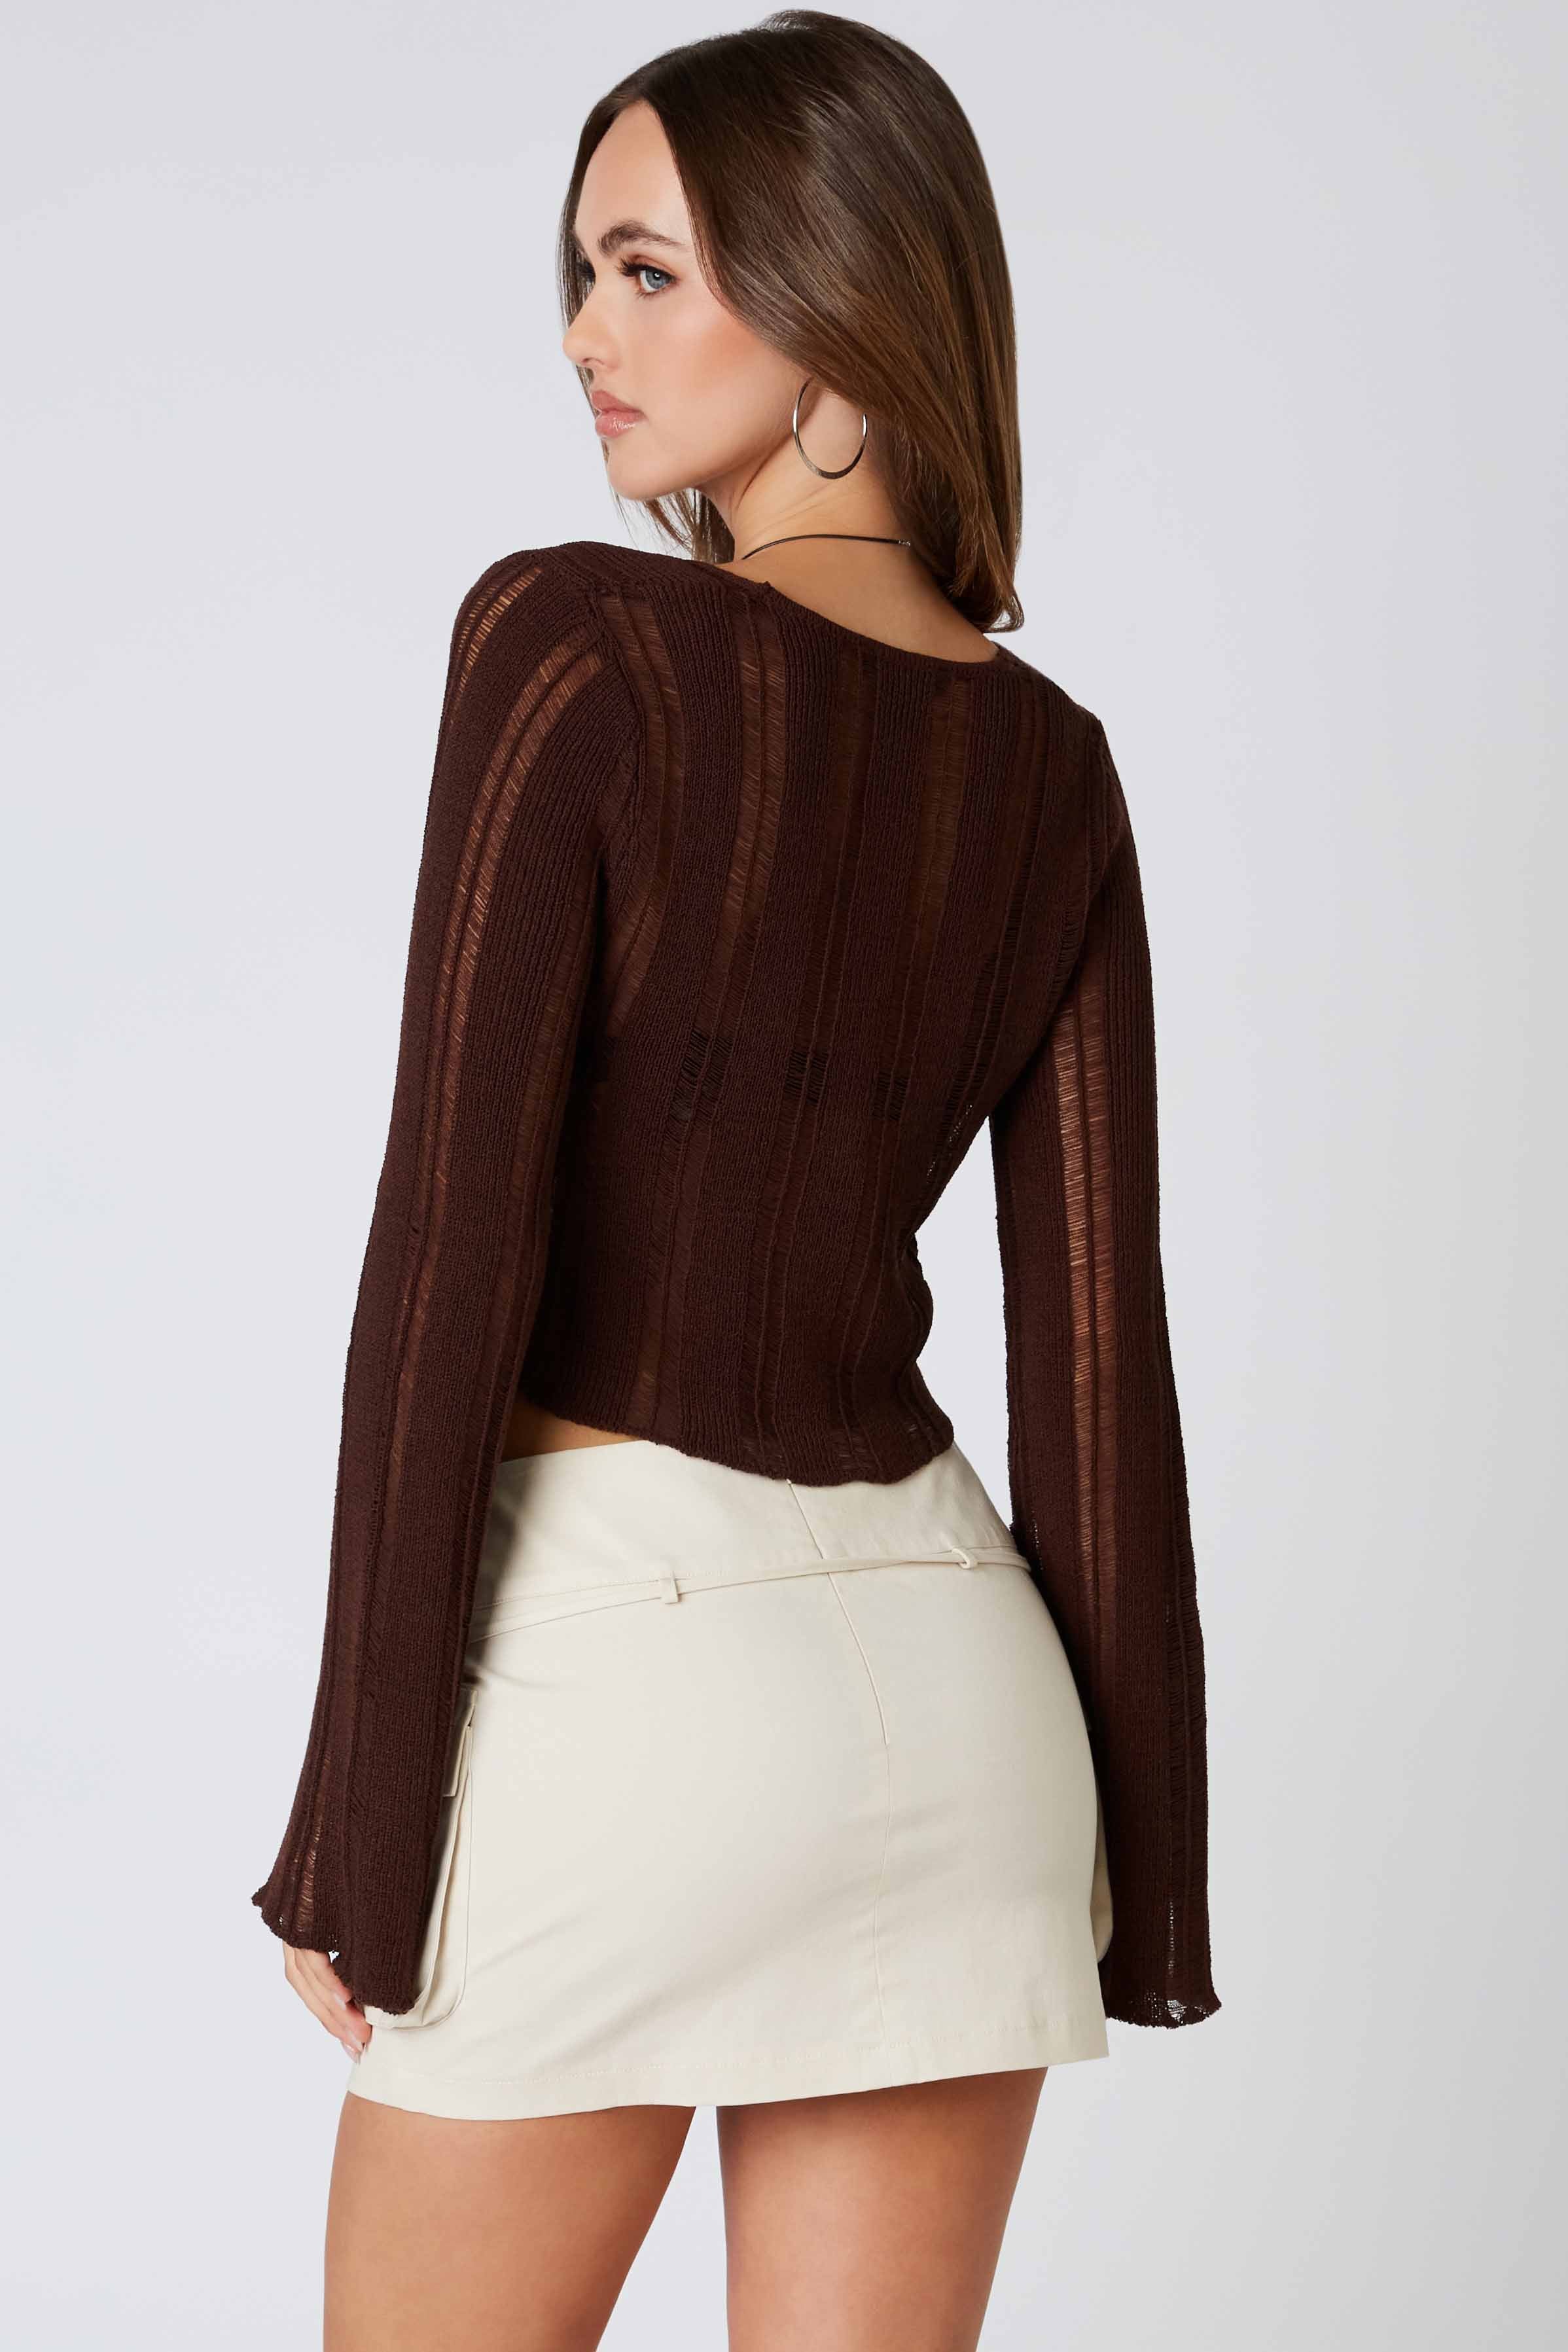 Crochet Knit Bell Sleeve Cardigan in Chocolate Back View